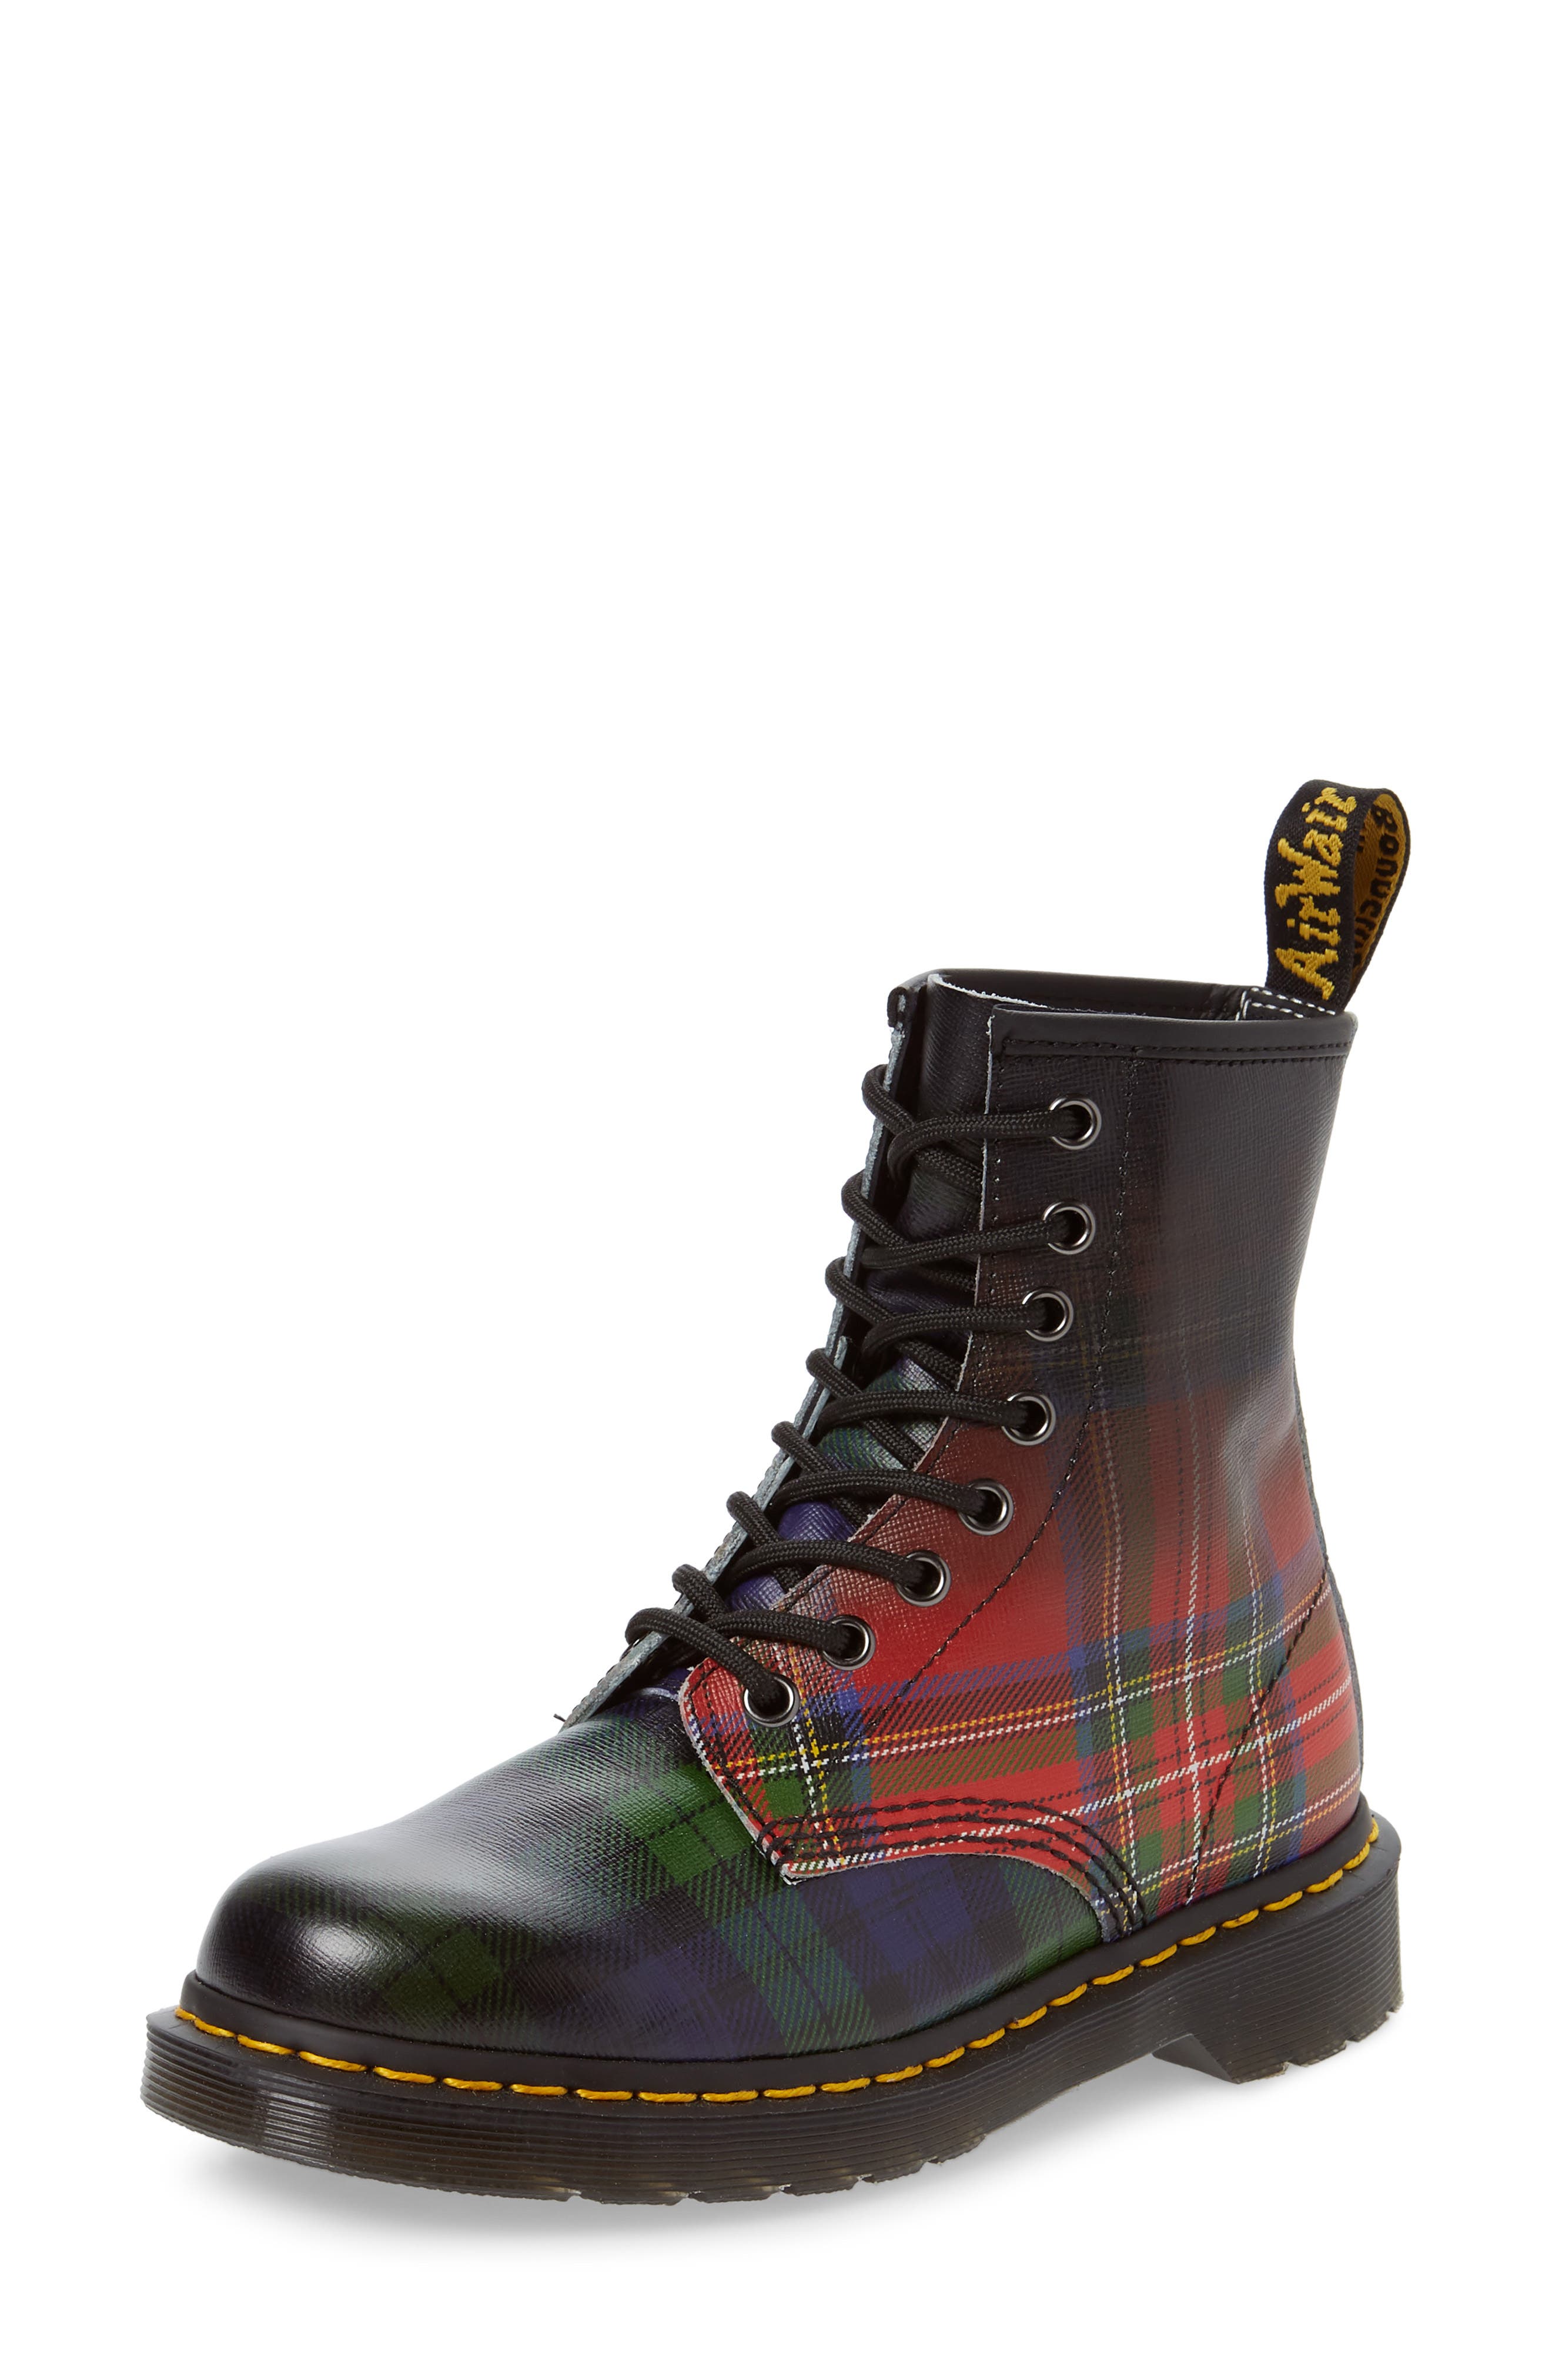 who sells doc martens